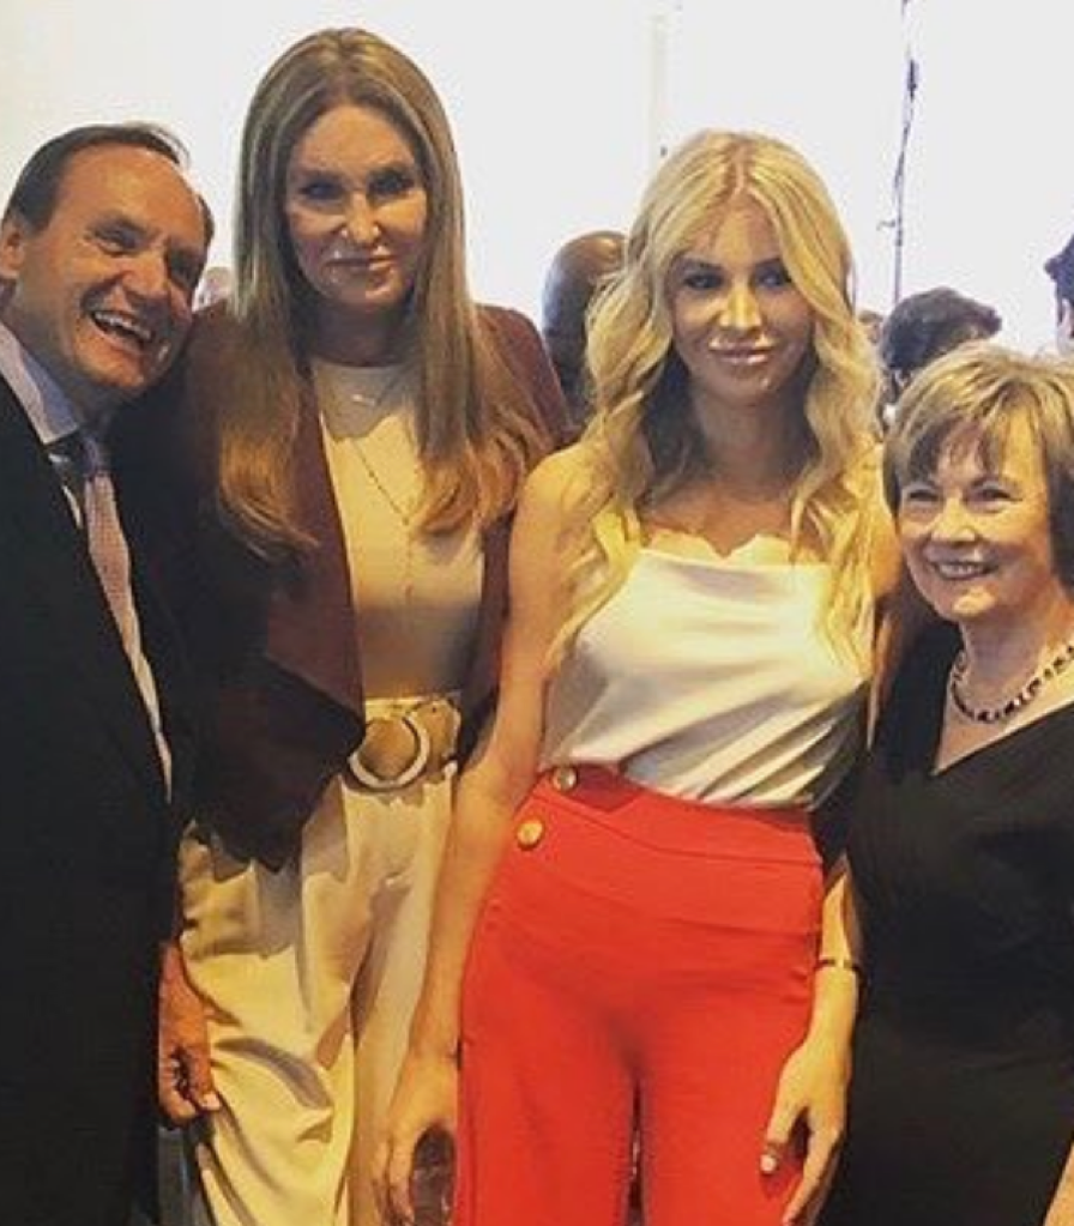 Caitlyn Jenner And Sophia Hutchins Together